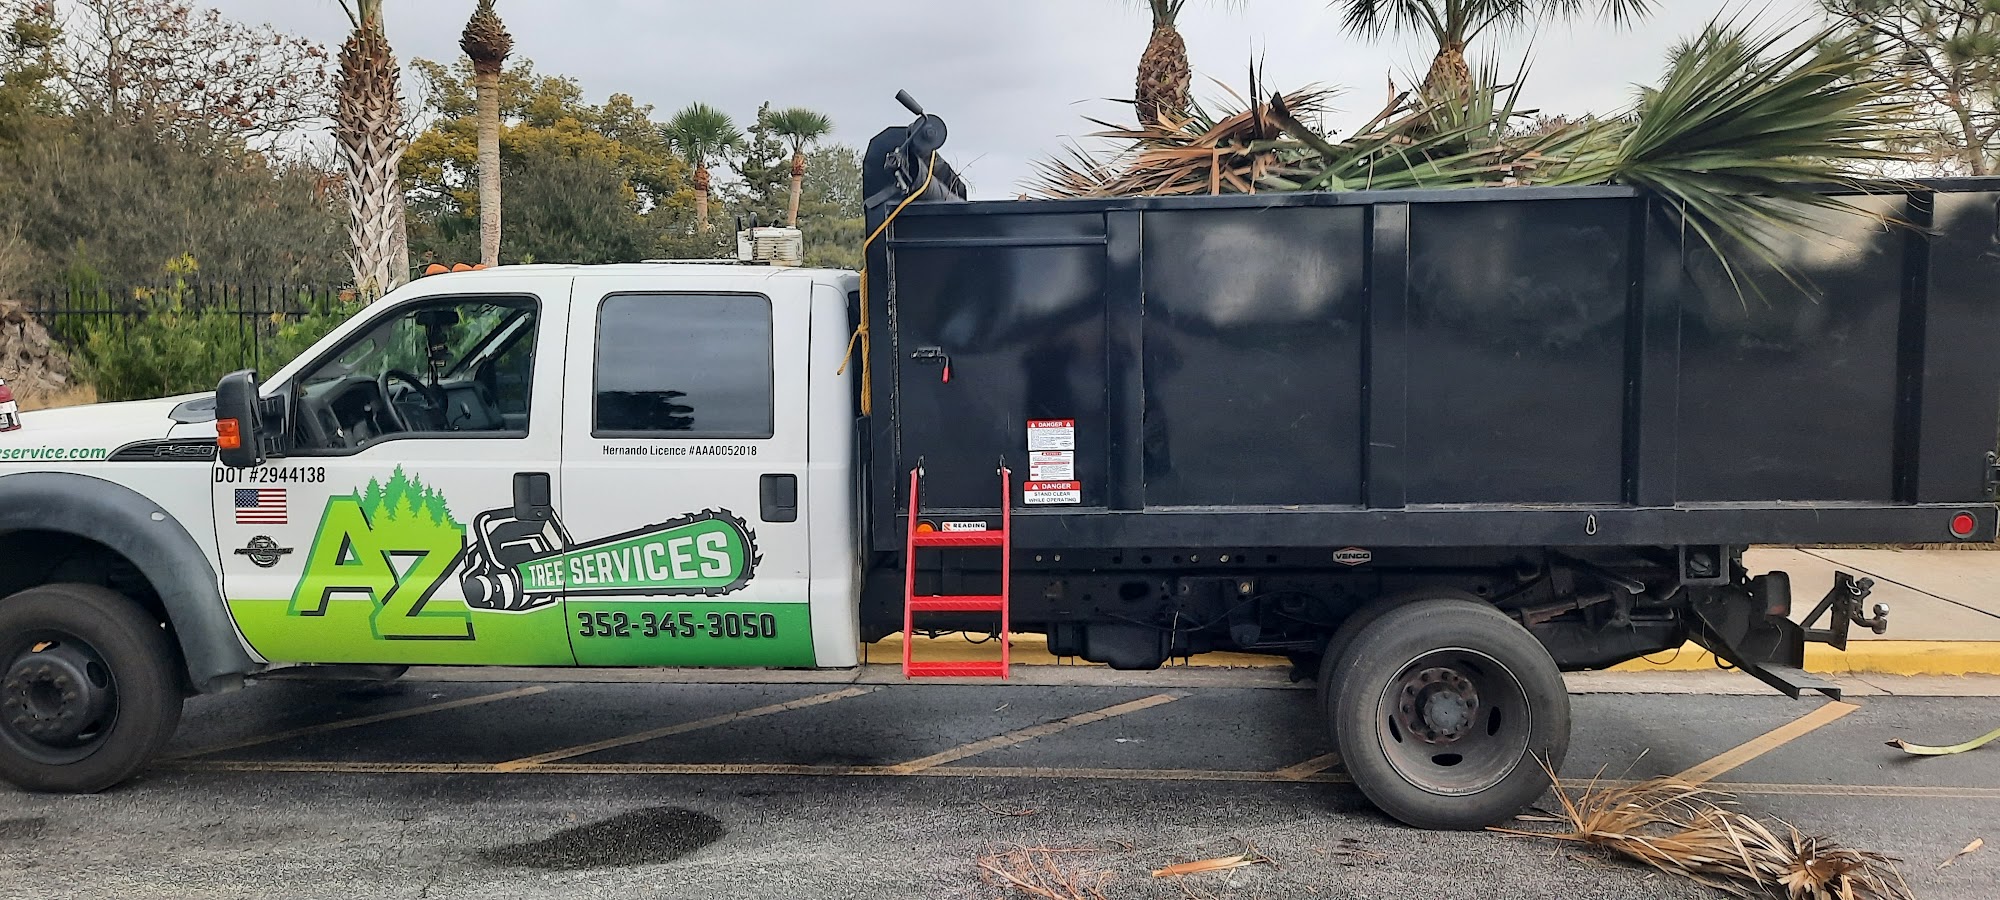 A-Z Tree Services #AAA0052018